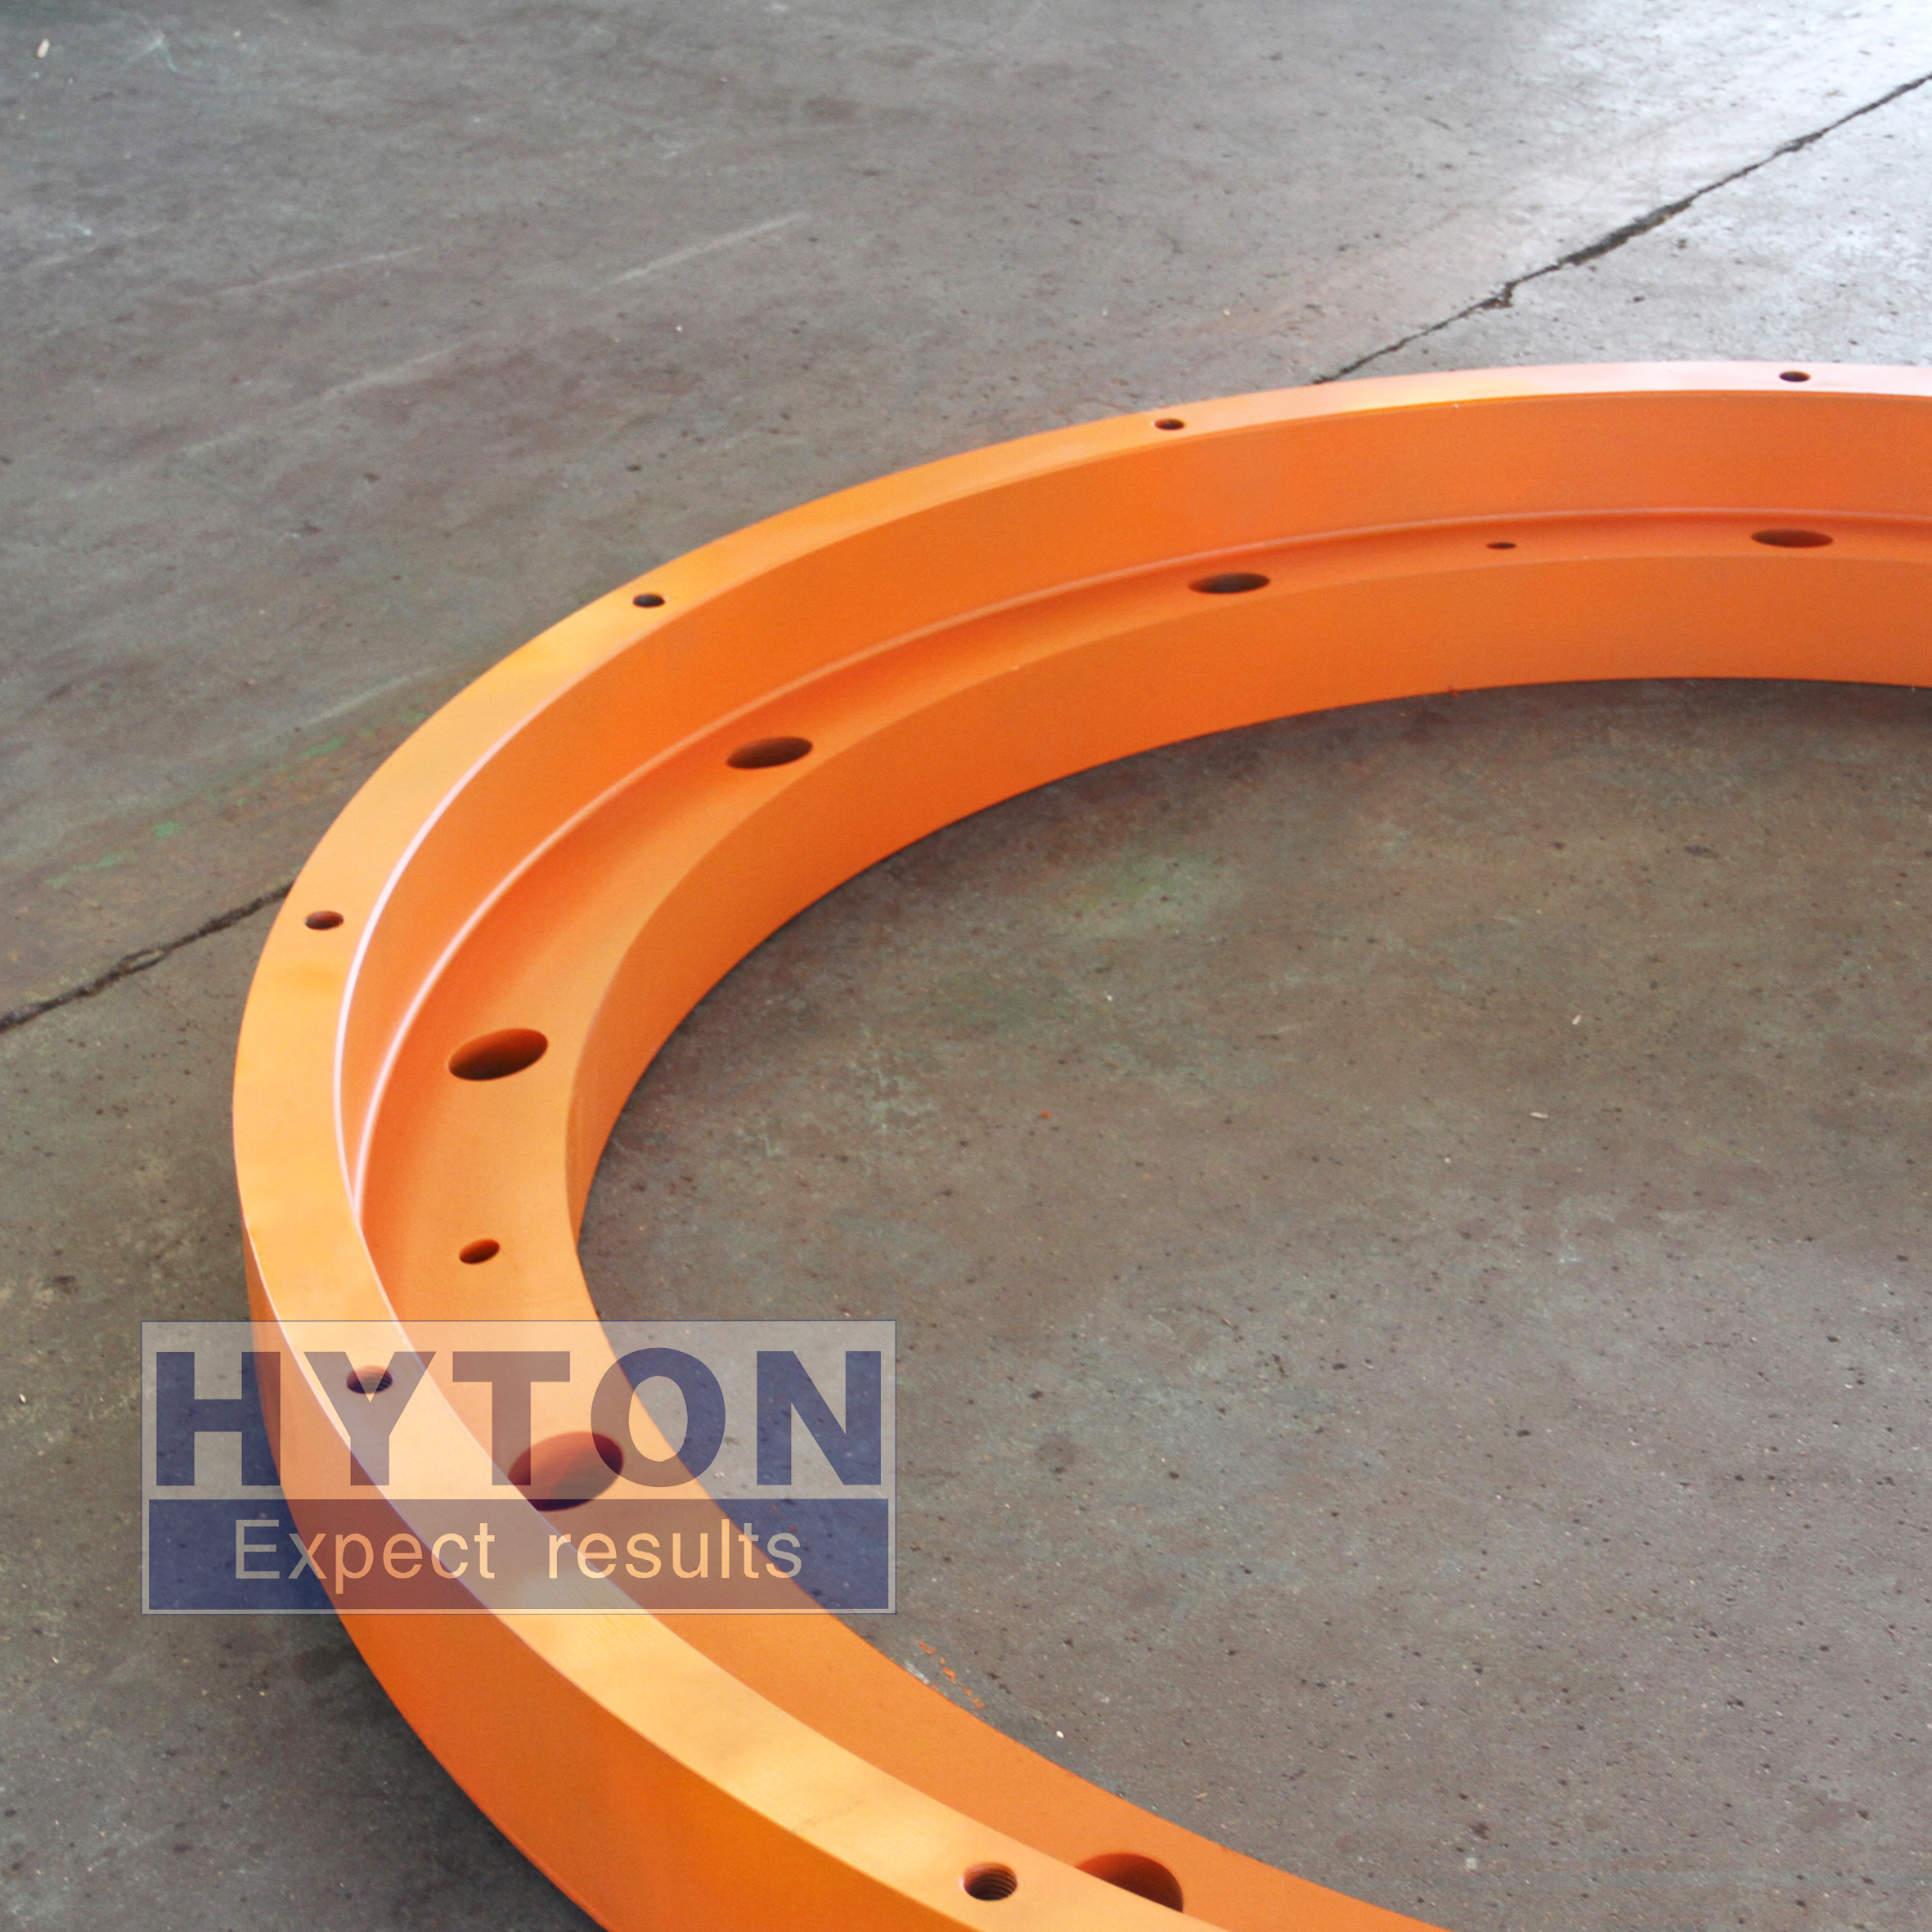 Spare Part Upper Dust Seal Retainer Suit to Metso SG60-89 Gyratory Crusher